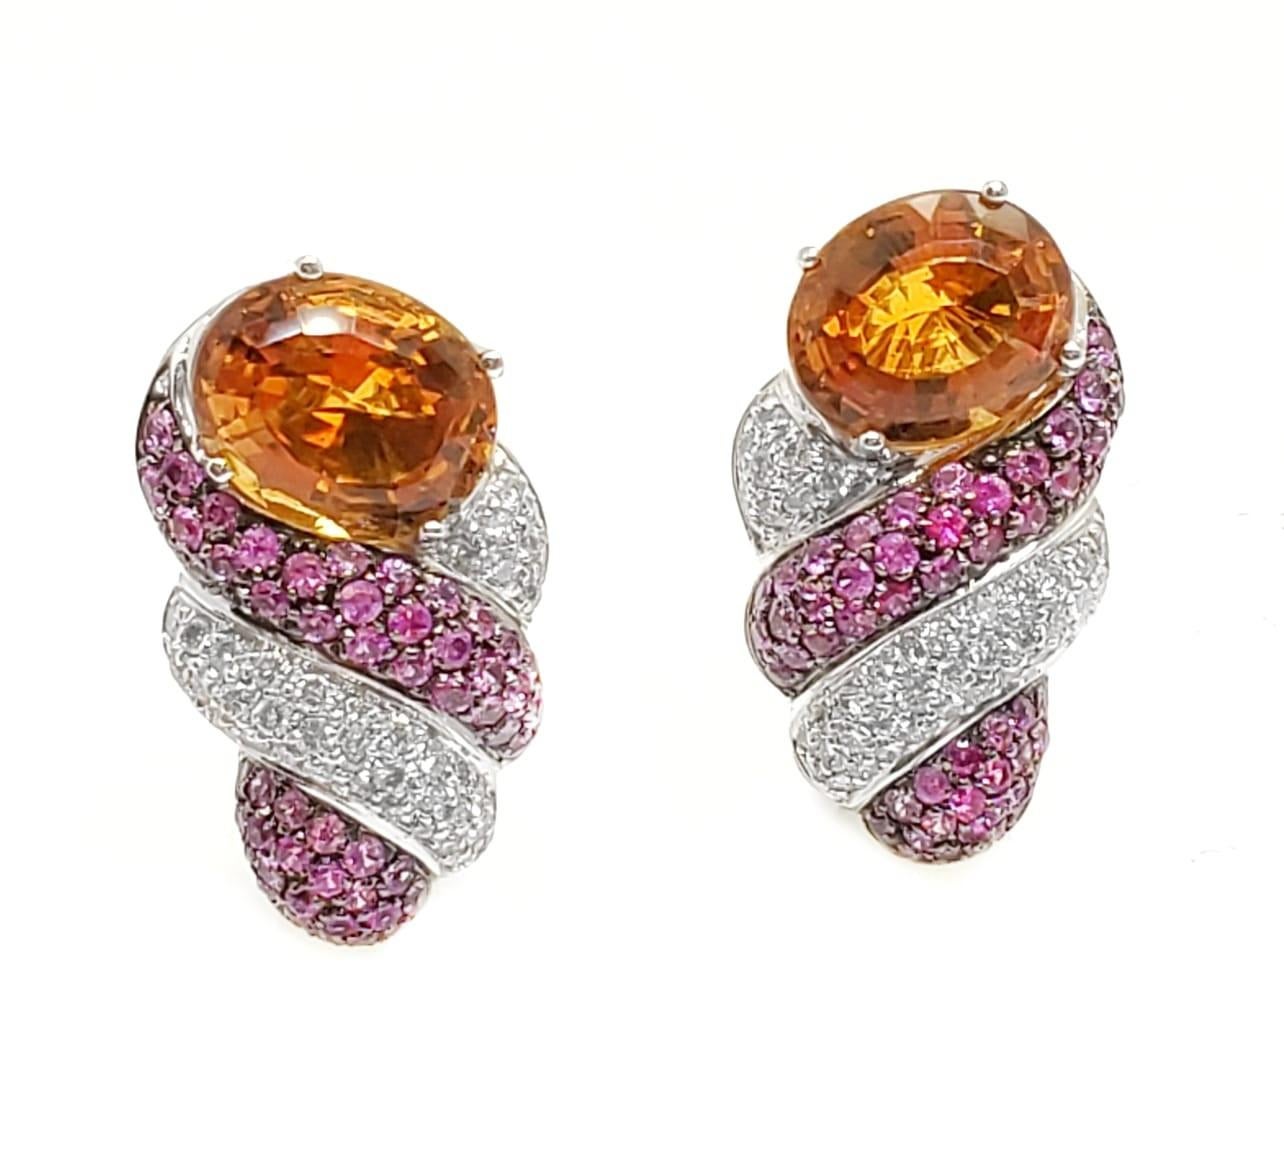 Andreoli Citrine Pink Sapphire Diamond 18 Karat White Gold Earrings

These earrings feature:
- Citrine
- 2.33 Carat Pink Sapphire
- 1.22 Carat Diamond
- 24.40 Gram 18K White Gold
- Made In Italy